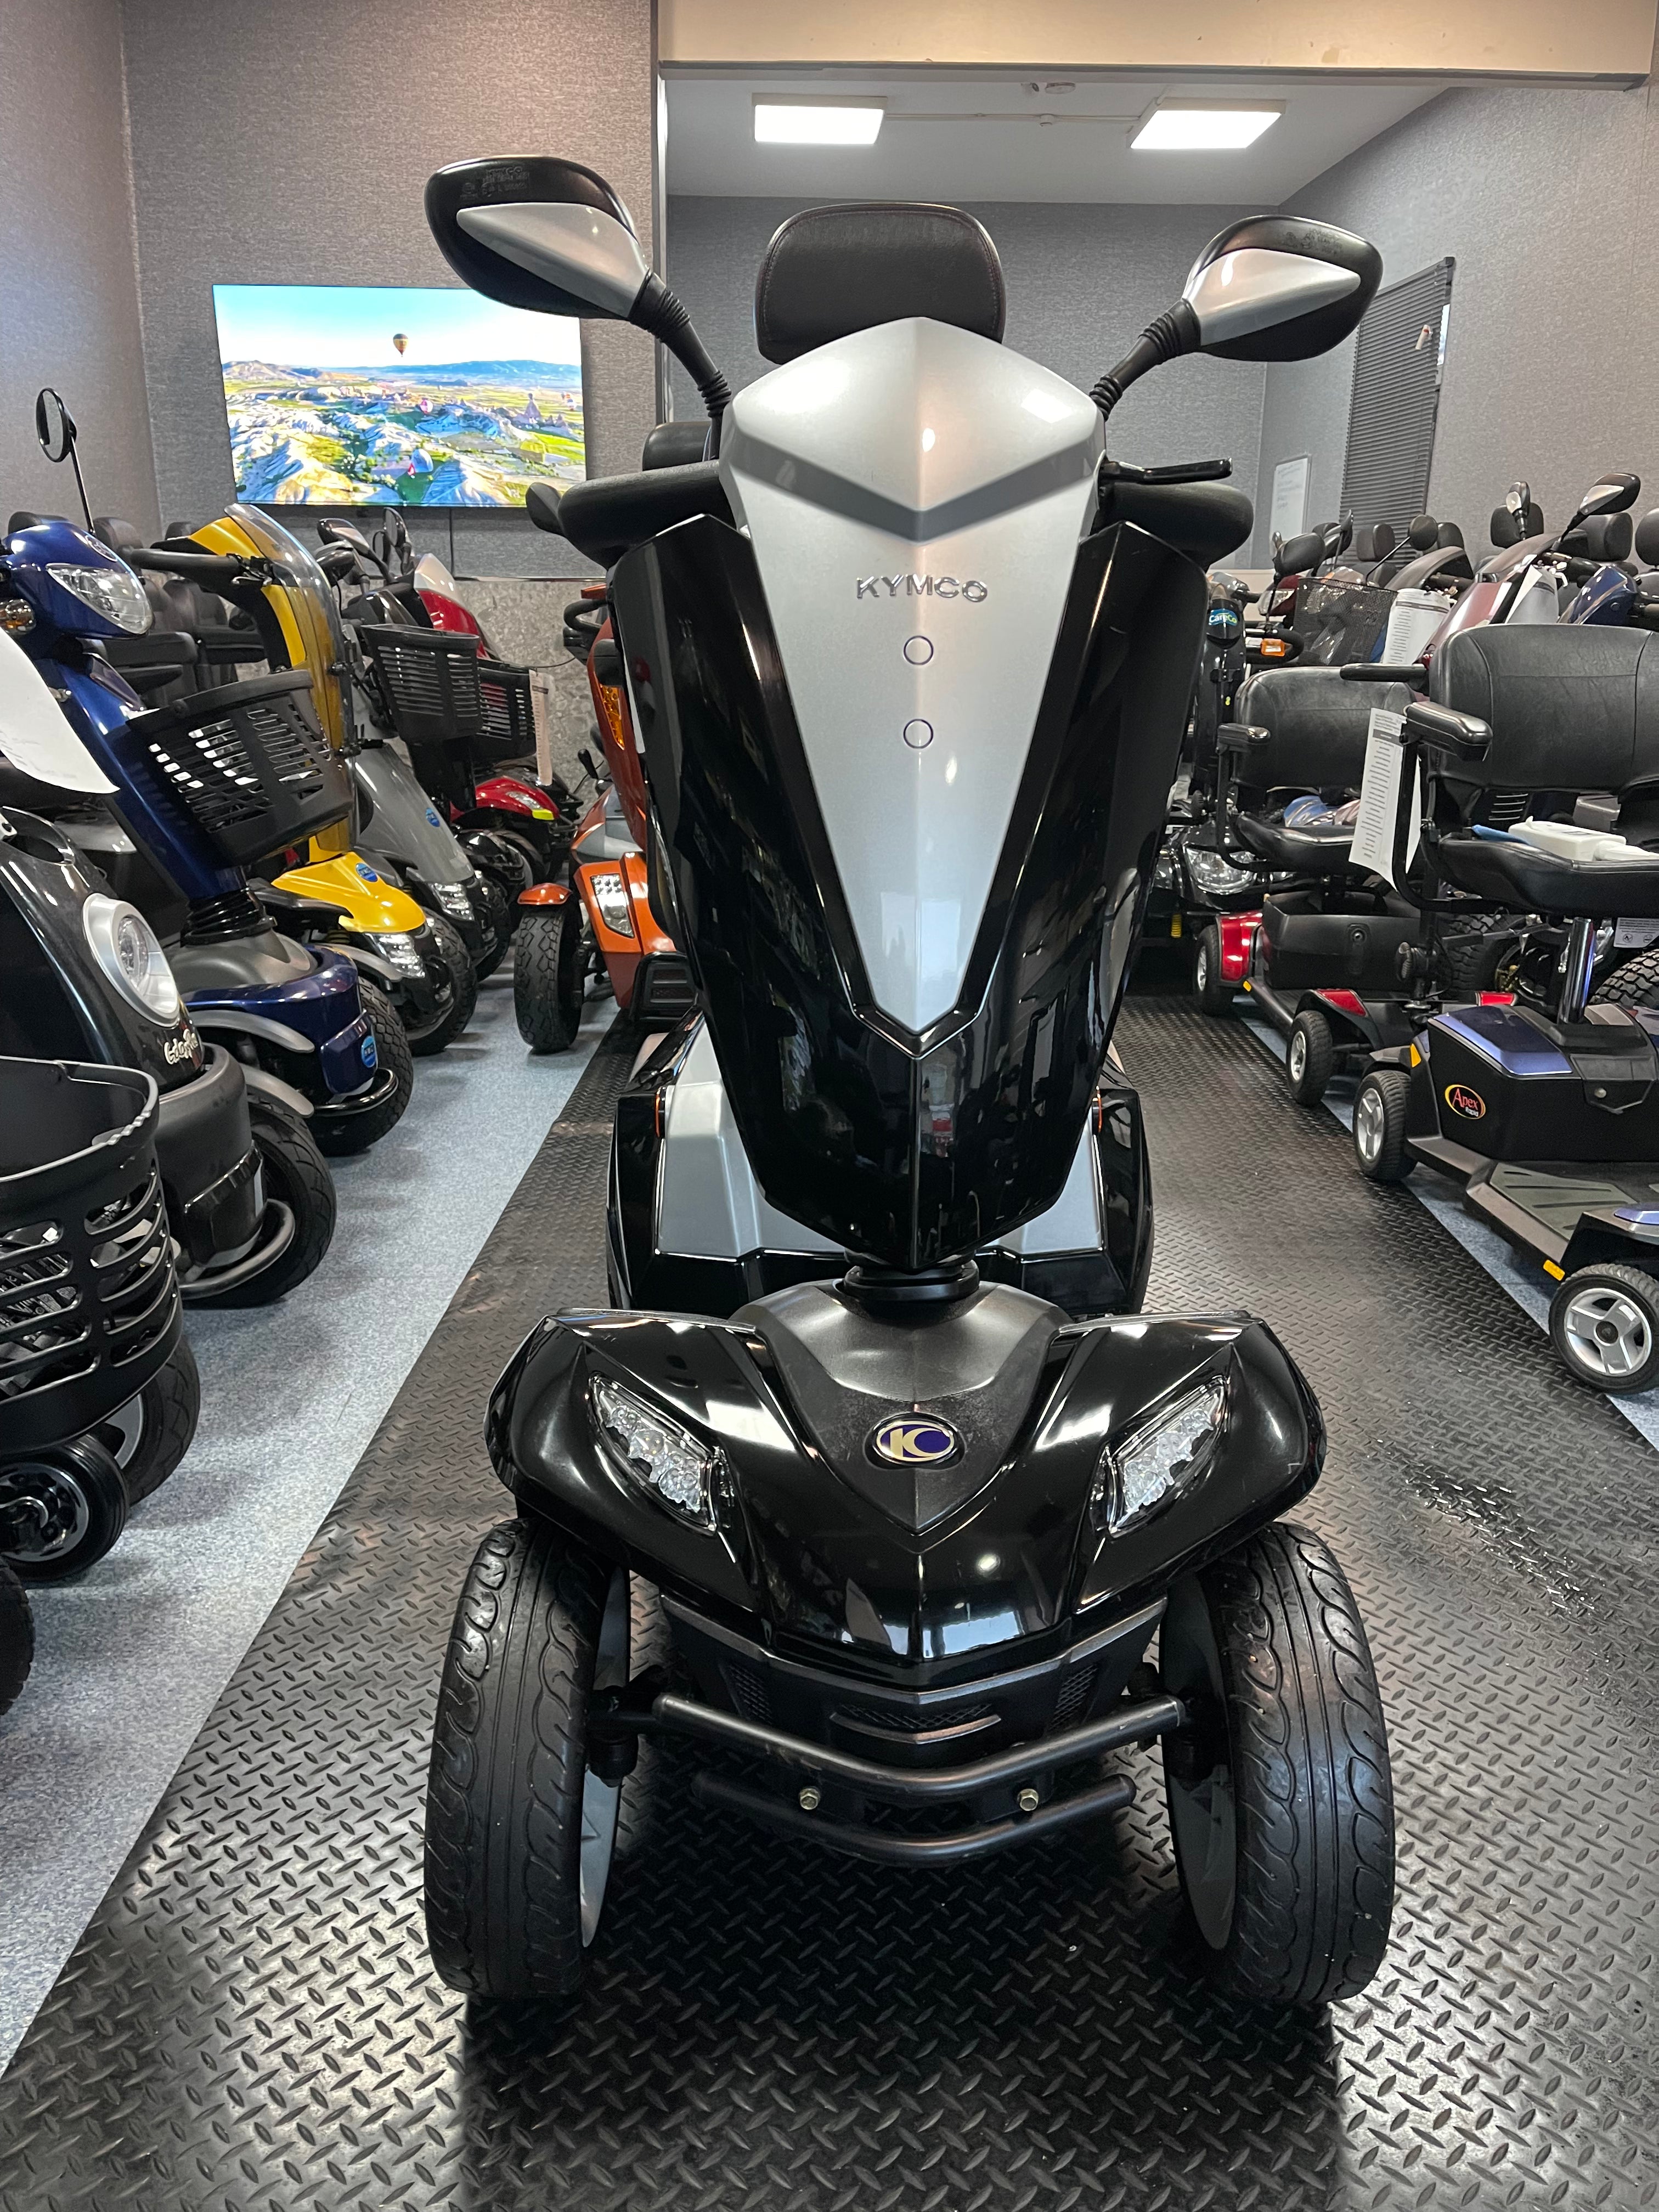 Kymco Maxer All Terrain Mobility Scooter 8mph - Approved Used